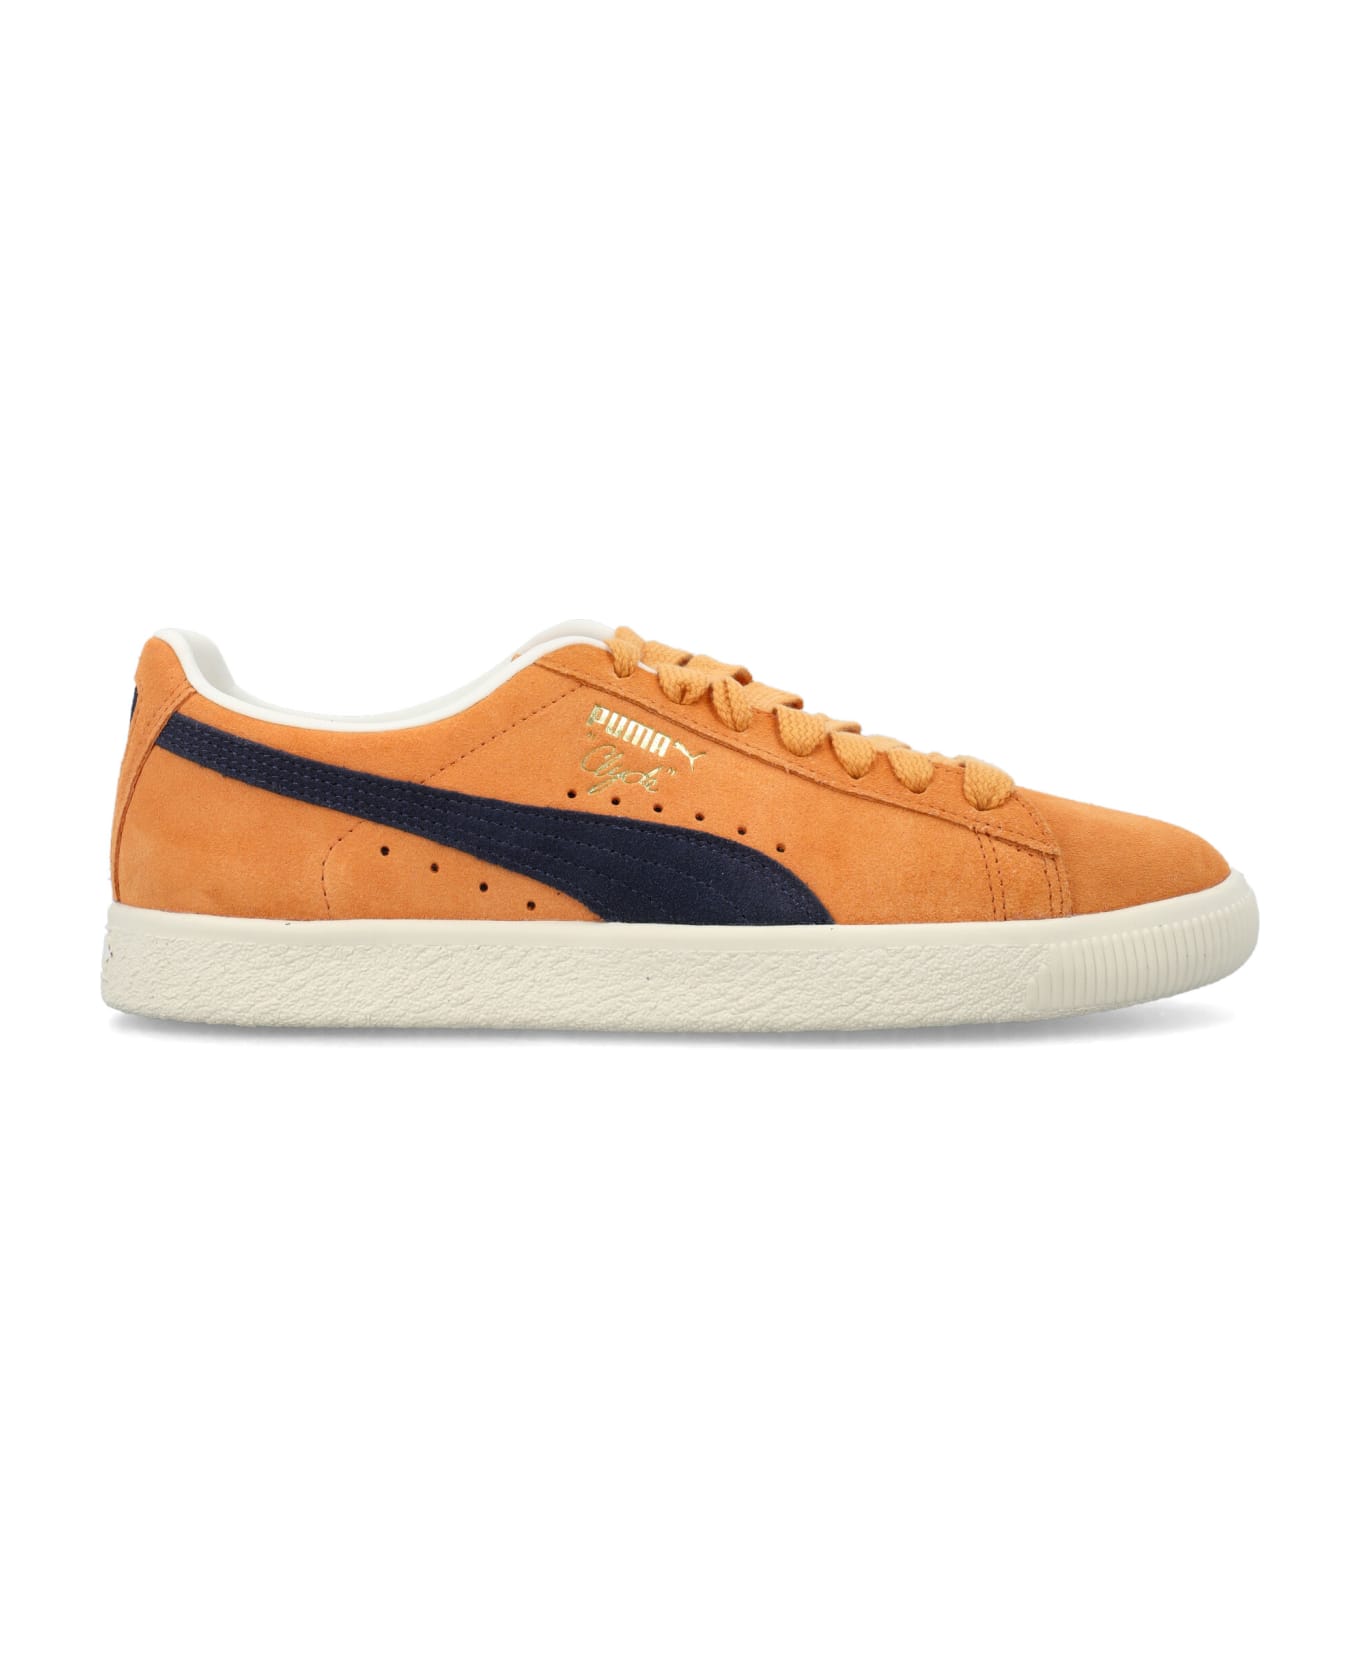 Puma Clyde Og Sneakers - CLEMENTINE NAVY